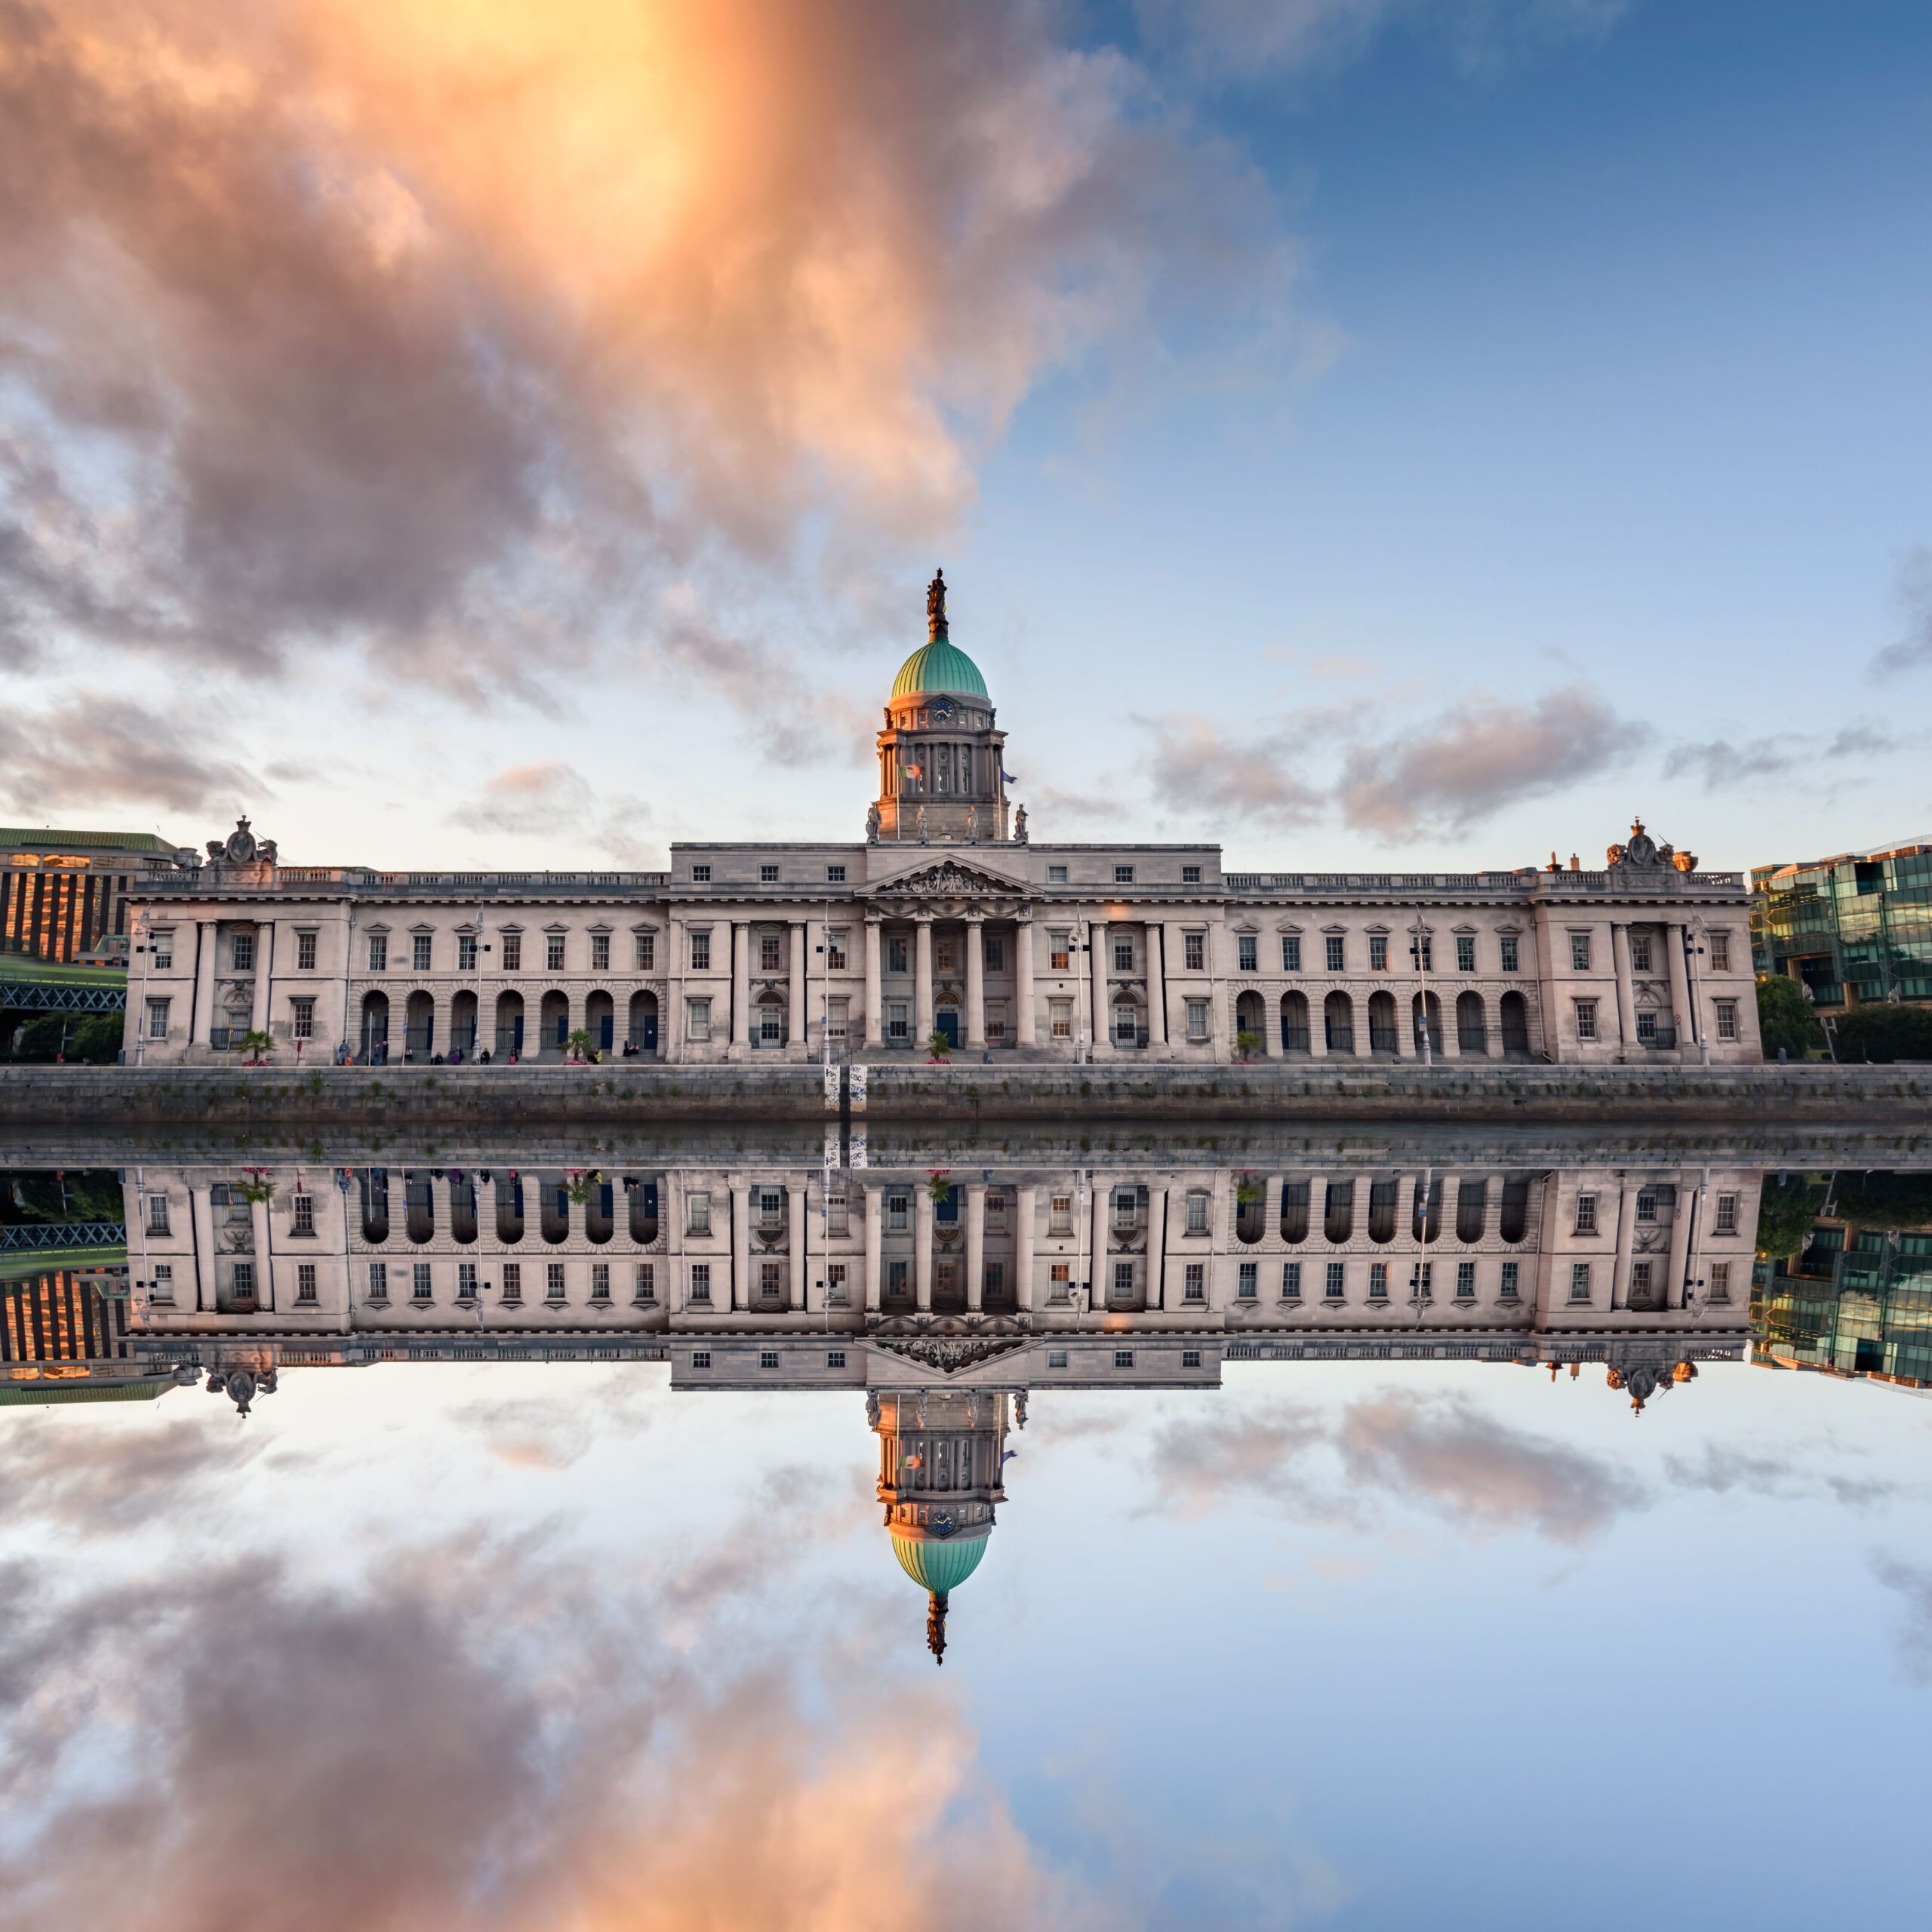 Outside visual of the South facade of the Custom House, overlooking the River Liffey